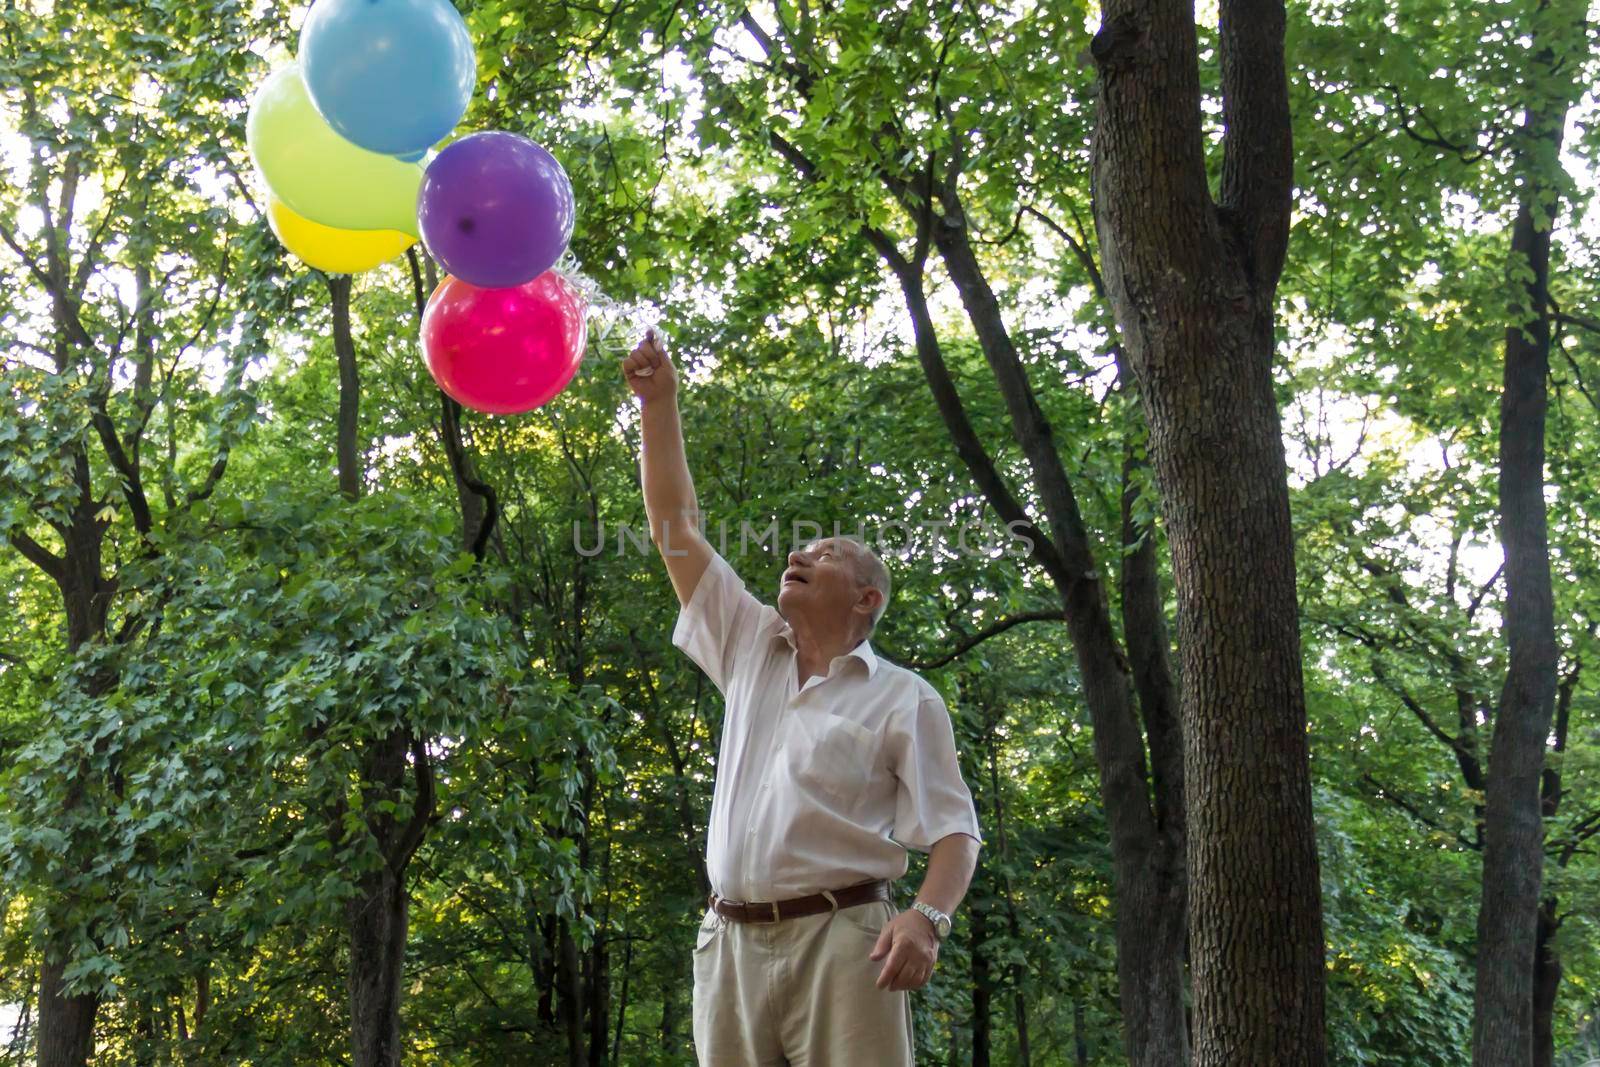 An old man is playing in the park with bright, balloons on his birthday.